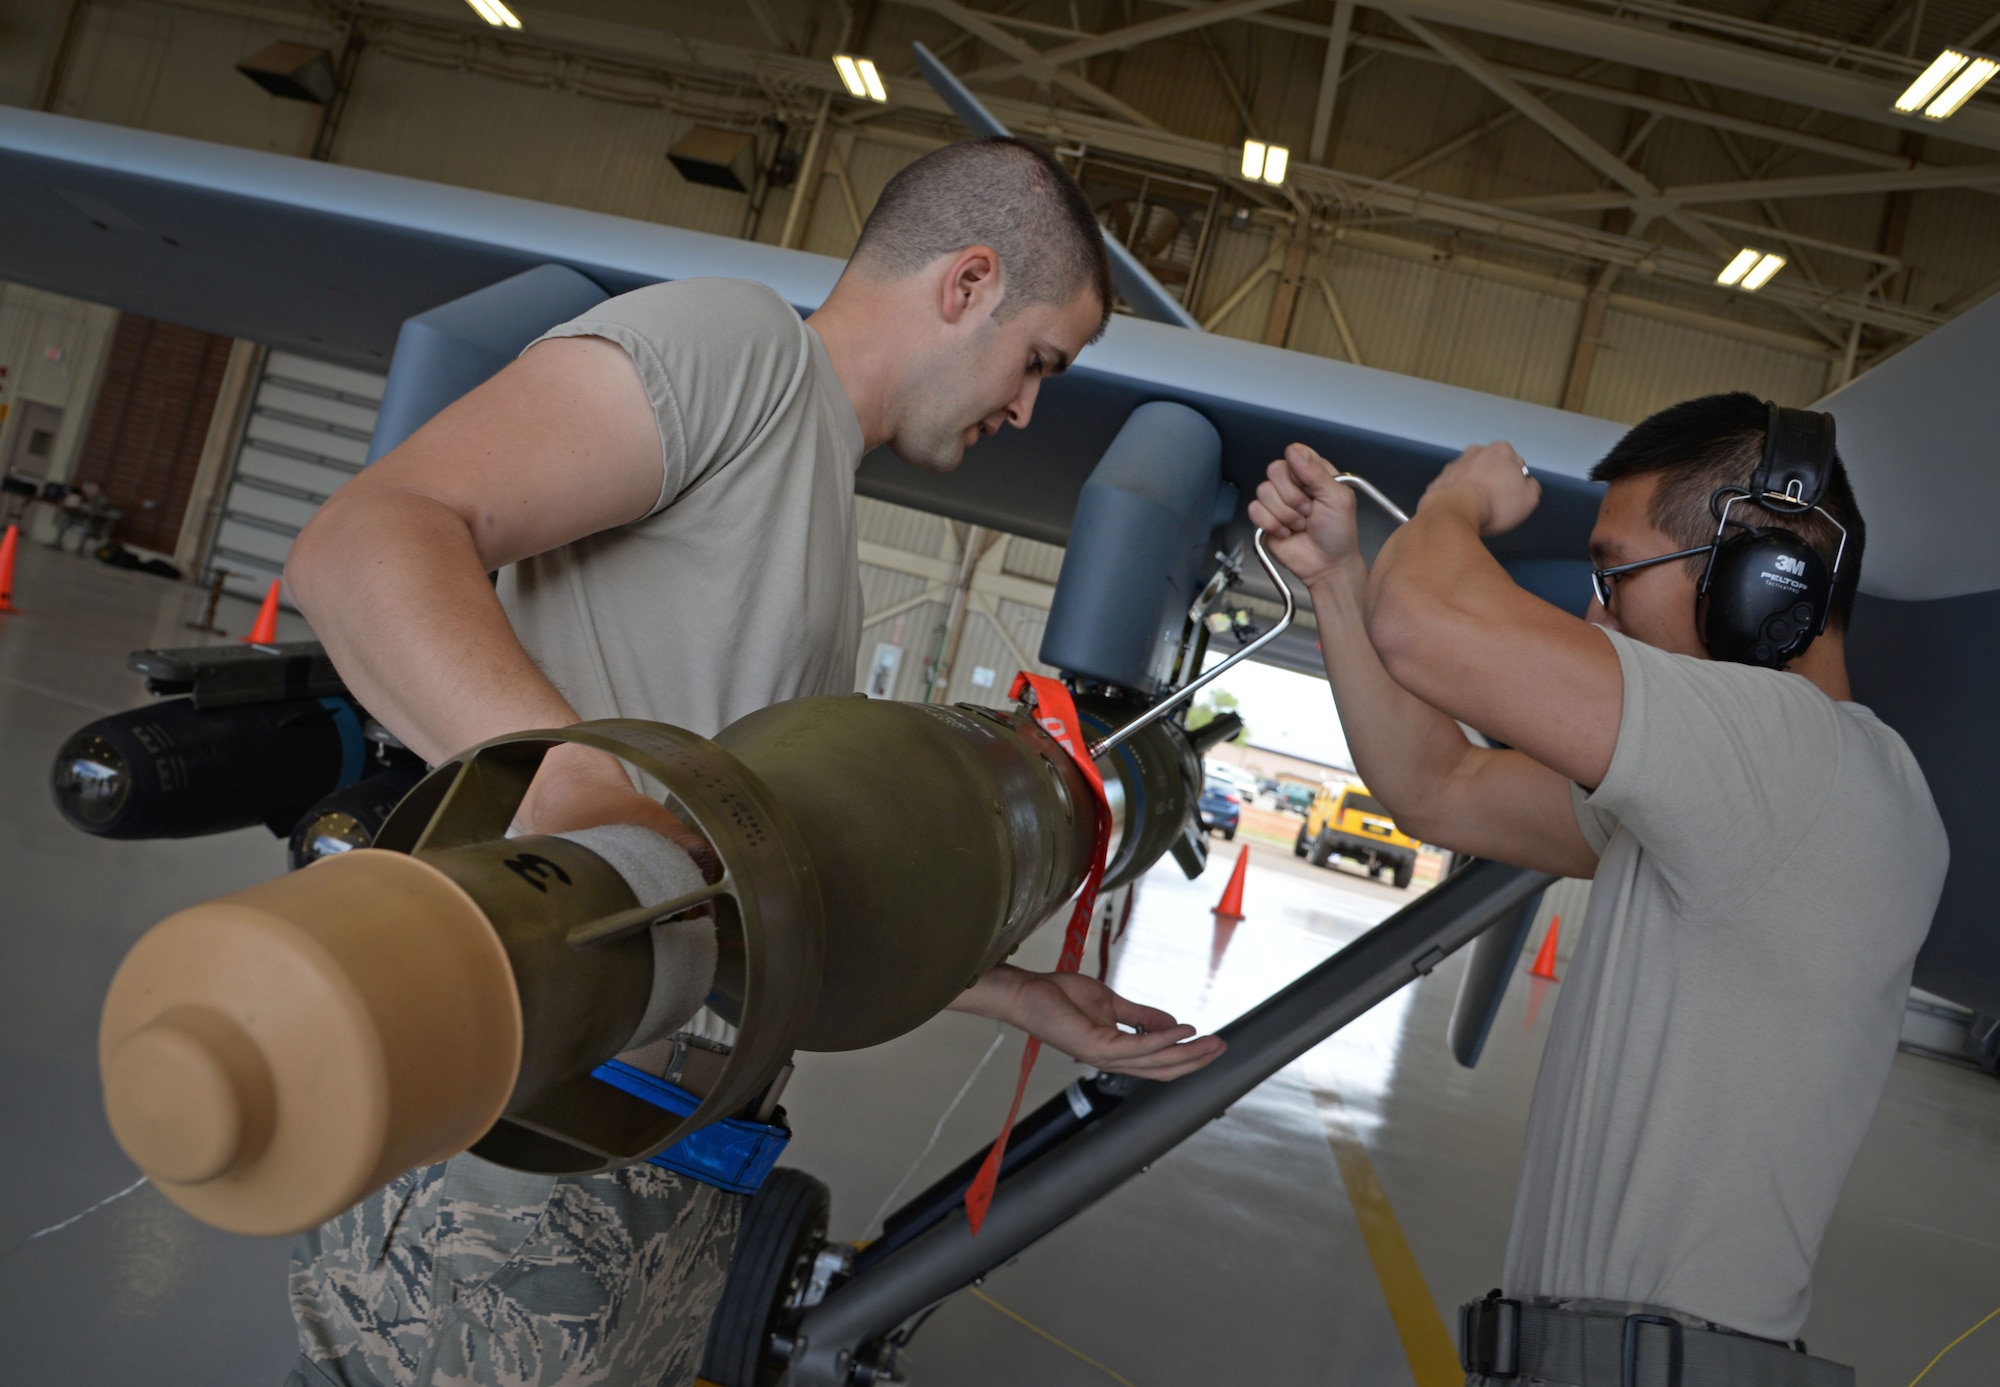 U.S. Air Force Senior Airman Josh Marion and Airman 1st Class Huy Diep, 27th Special Operations Maintenance Squadron MQ-9 Reaper and CV-22 Osprey armament shop, load inert weaponry on an MQ-9 during a load competition April 6, 2015 at Cannon Air Force Base, N.M. Weapons troops expertly loaded MQ-9 Reaper and AC-130W Stinger II platforms simultaneously, providing a real-time look into career field precision, while proving the depth of their unit’s cohesion at the 27th SOW. (U.S. Air Force photo/Staff Sgt. Alex Mercer)